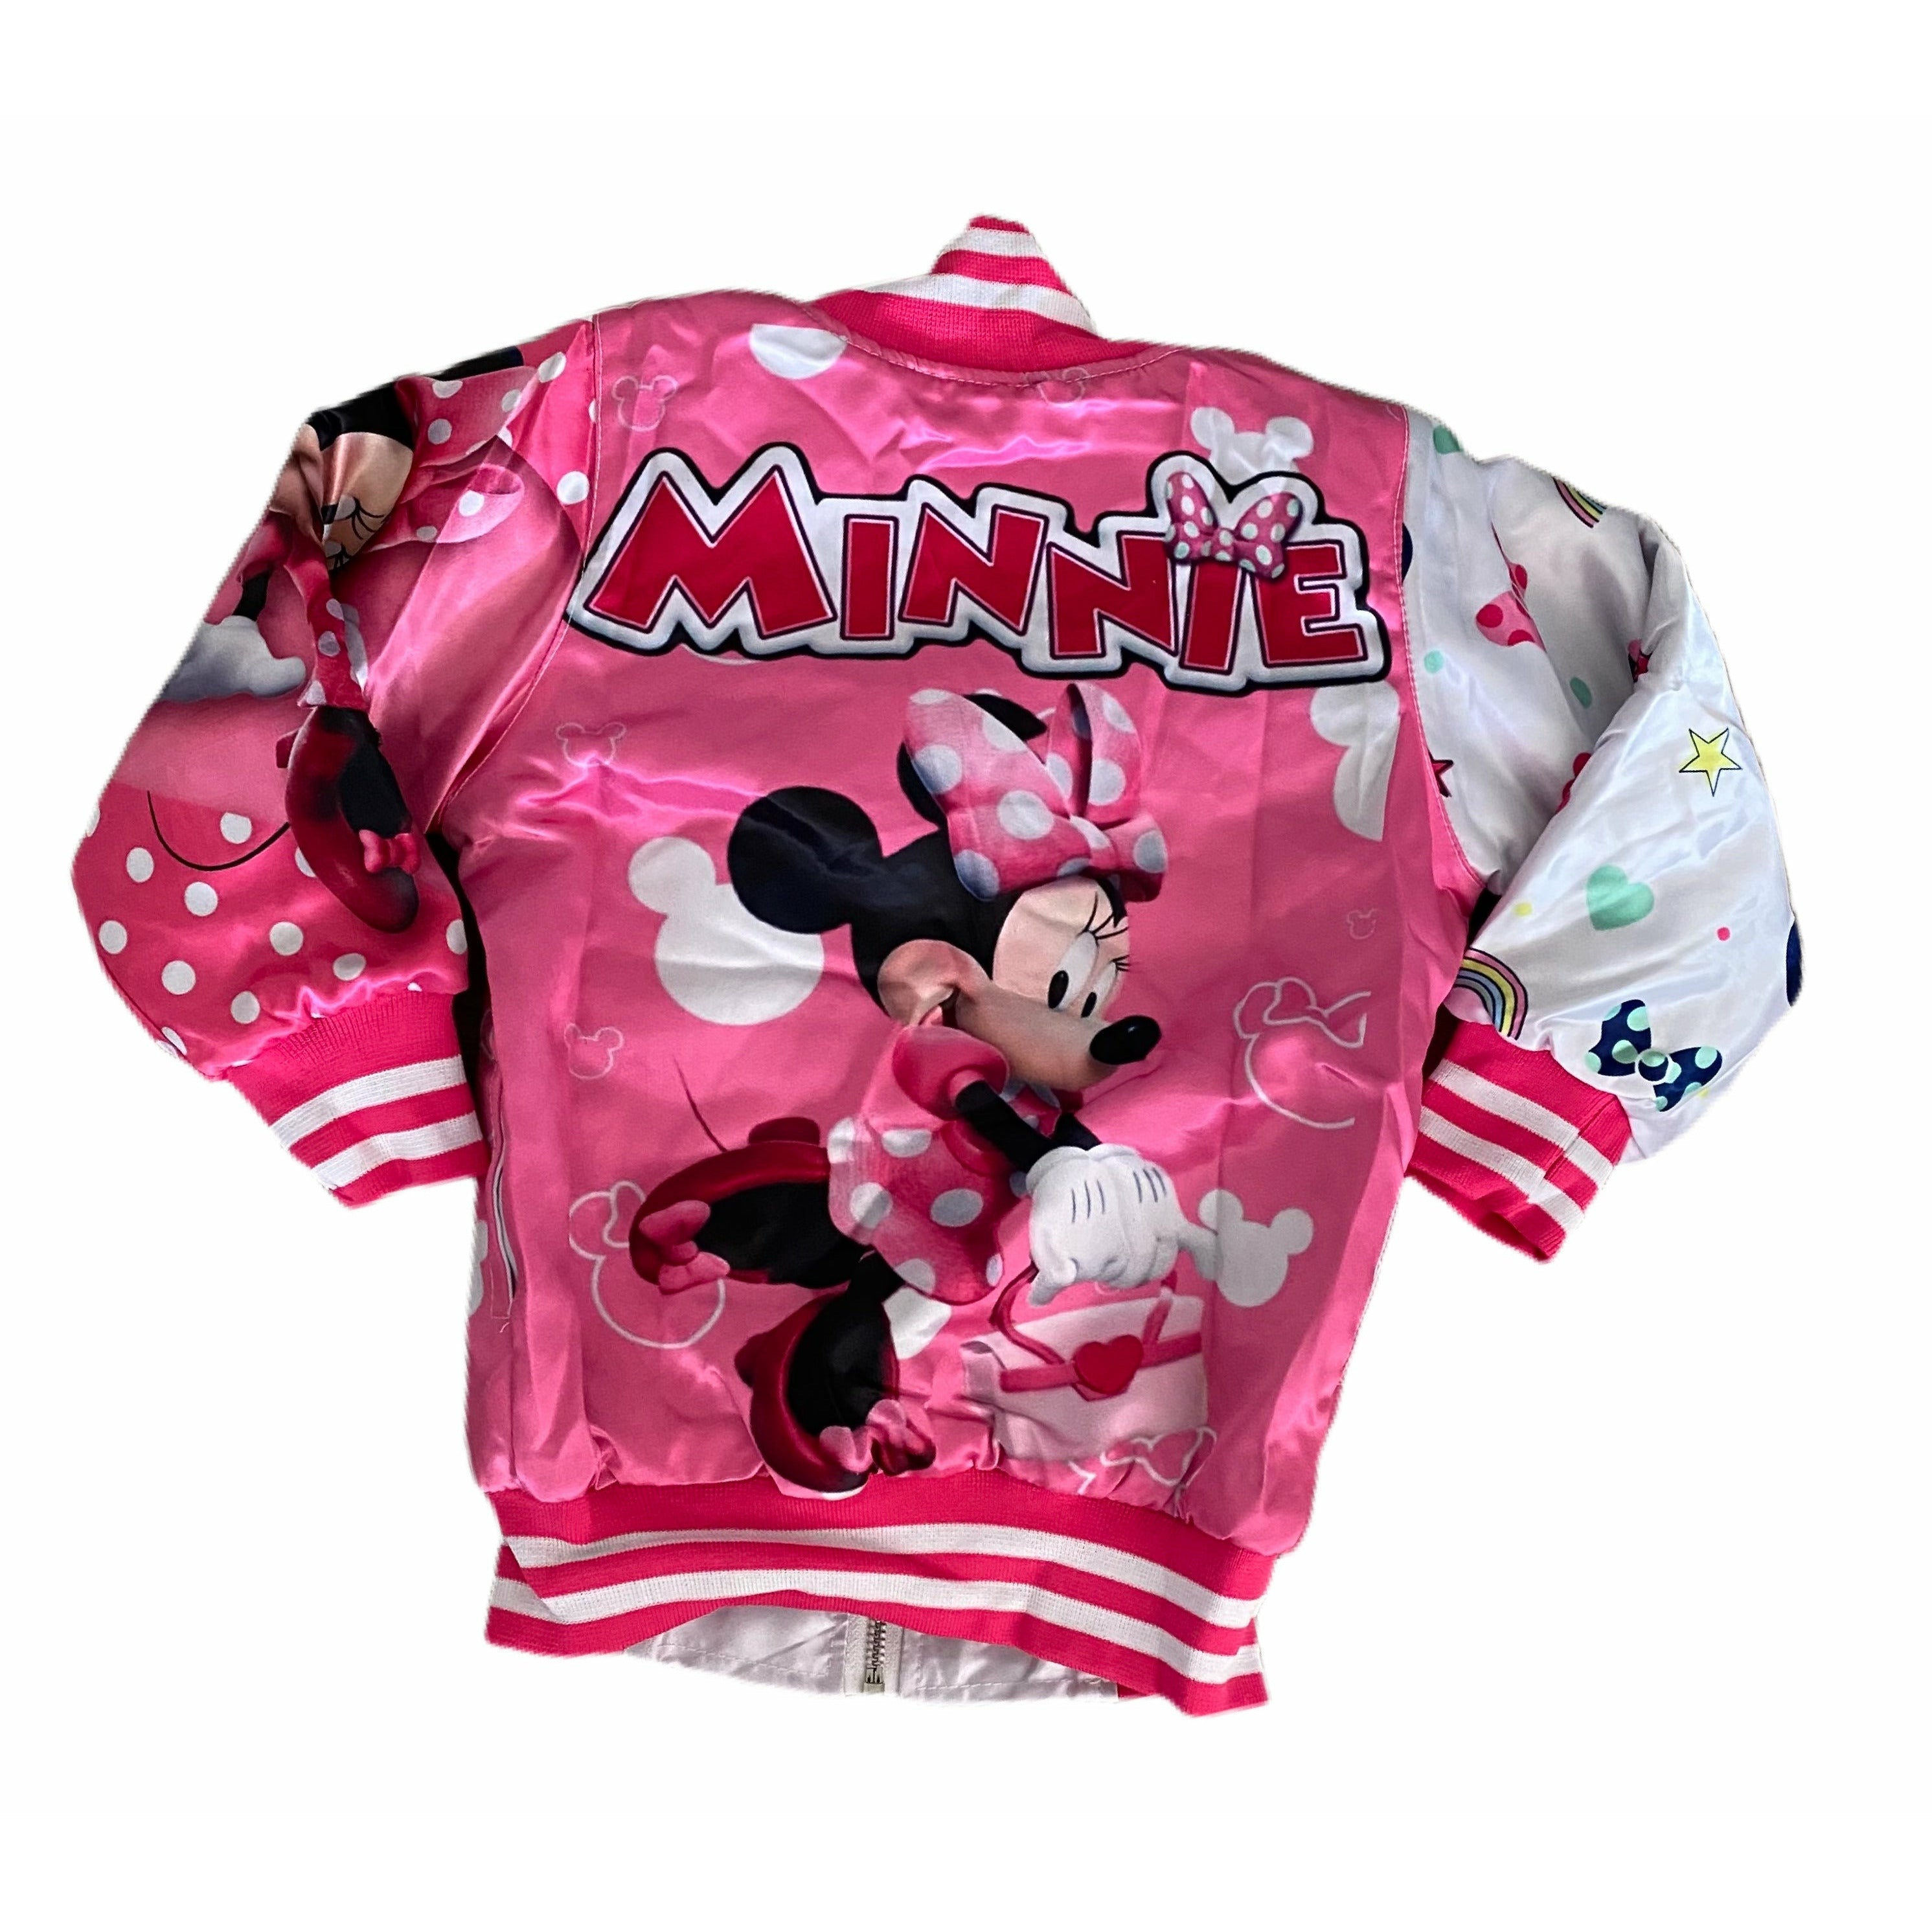 Women's Minnie Mouse Bomber